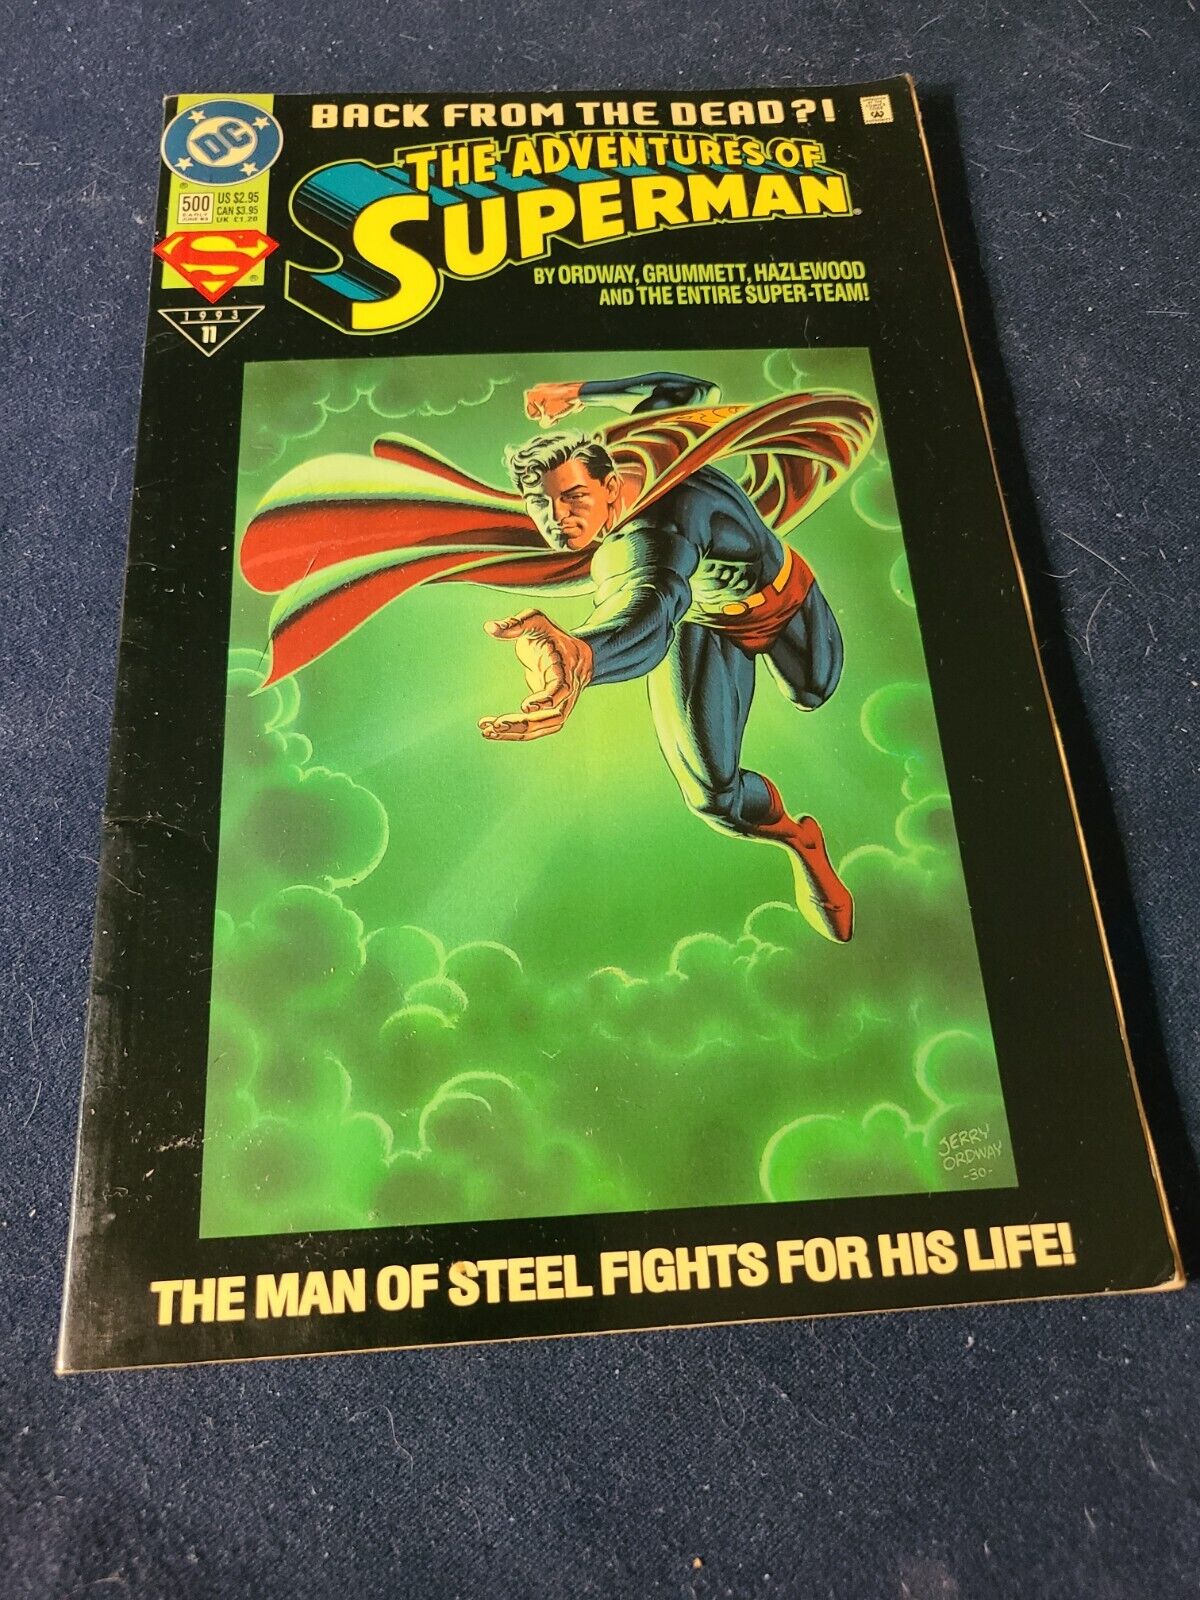 Adventures of Superman #500 (DC Comics, Early June 1993) Pre Owned Good